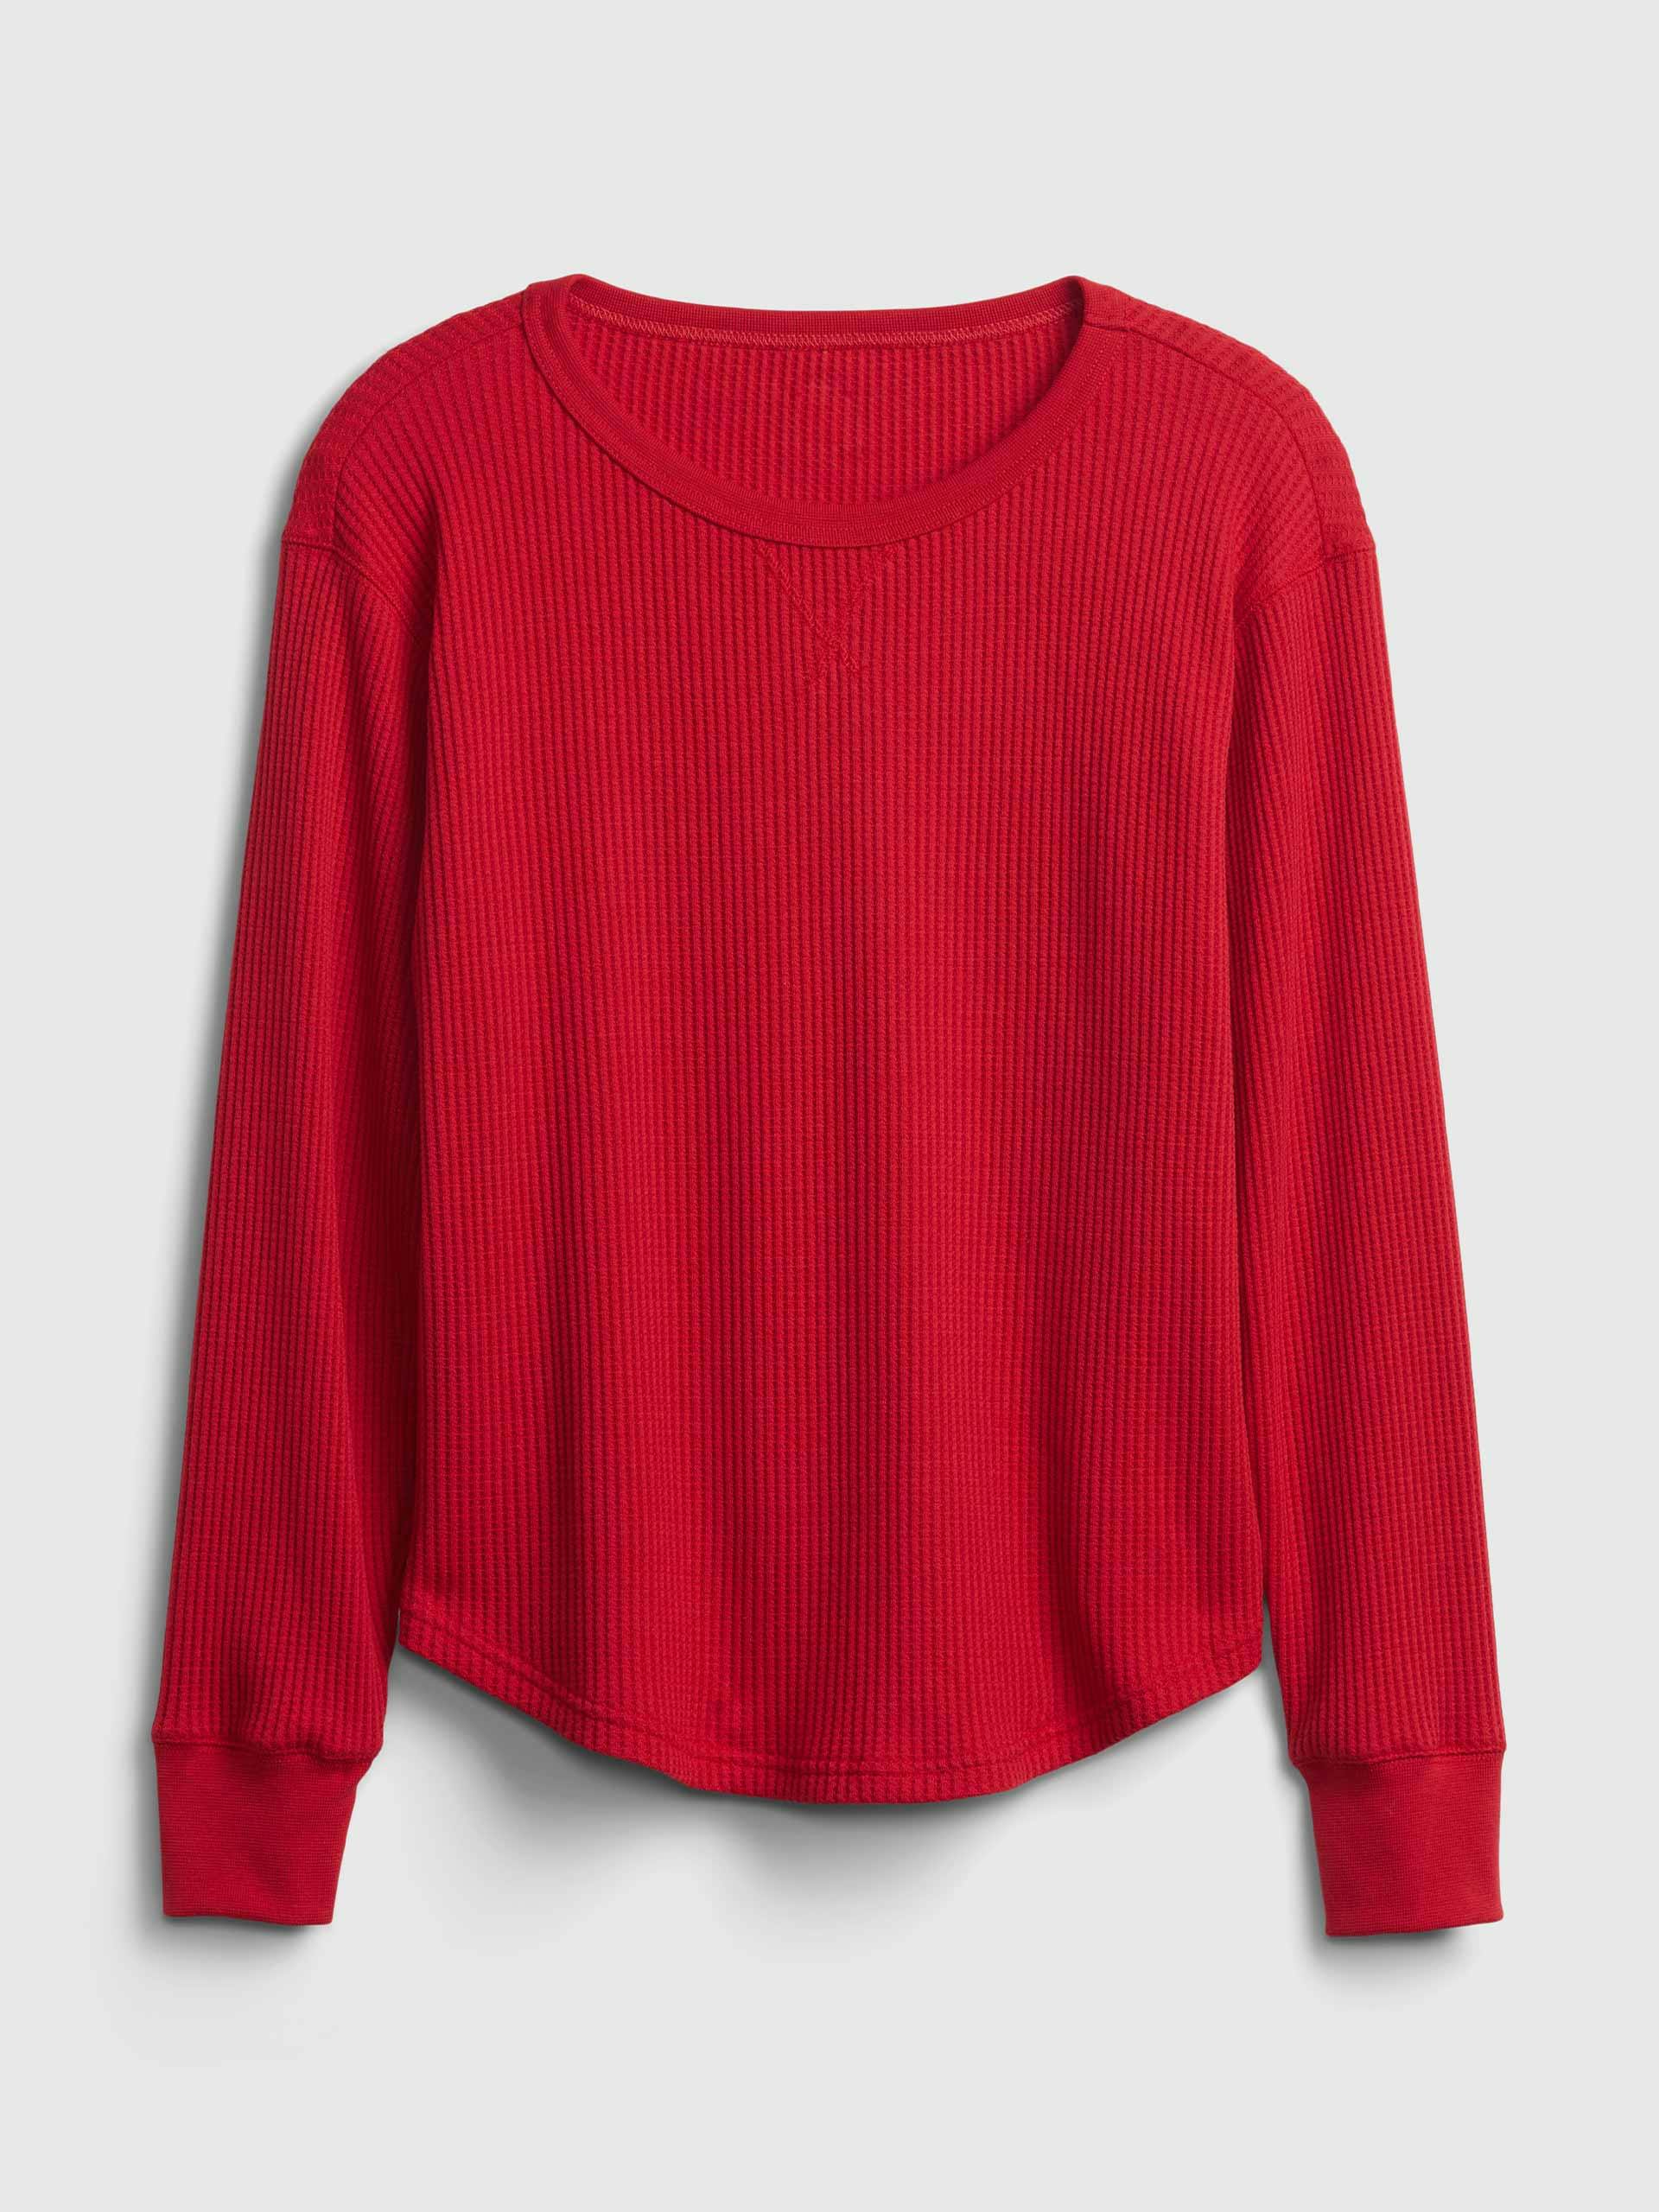 Waffle-knit red top